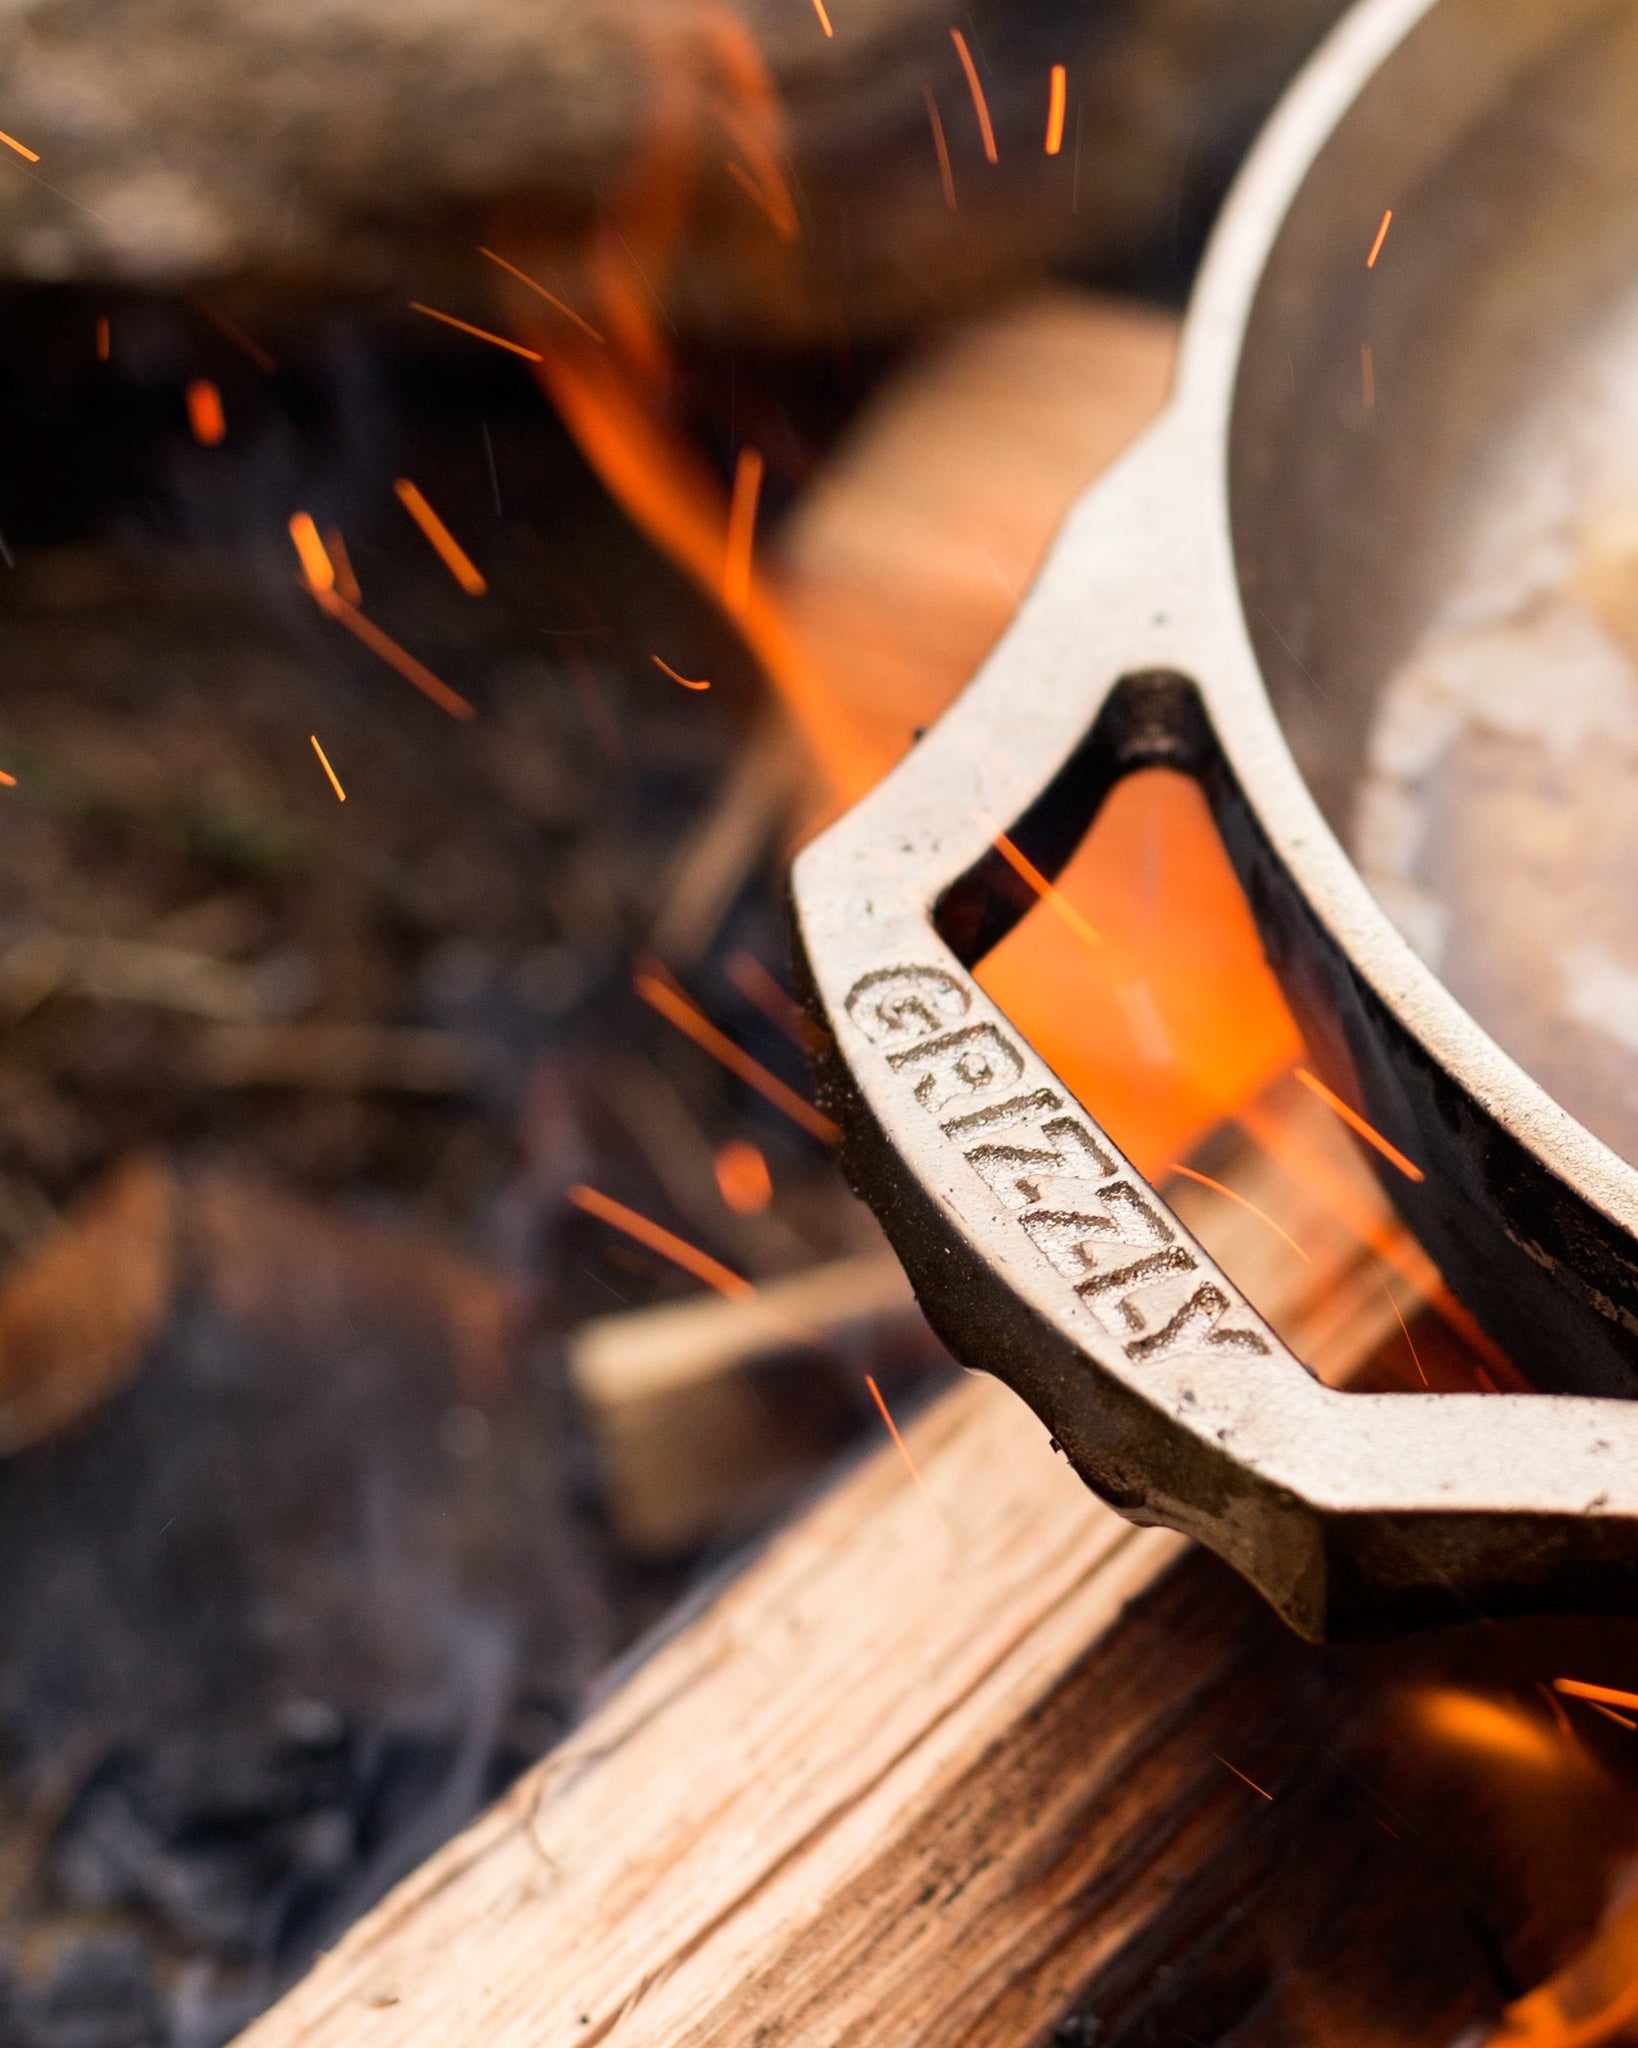 American-made cast iron cookware on the campfire